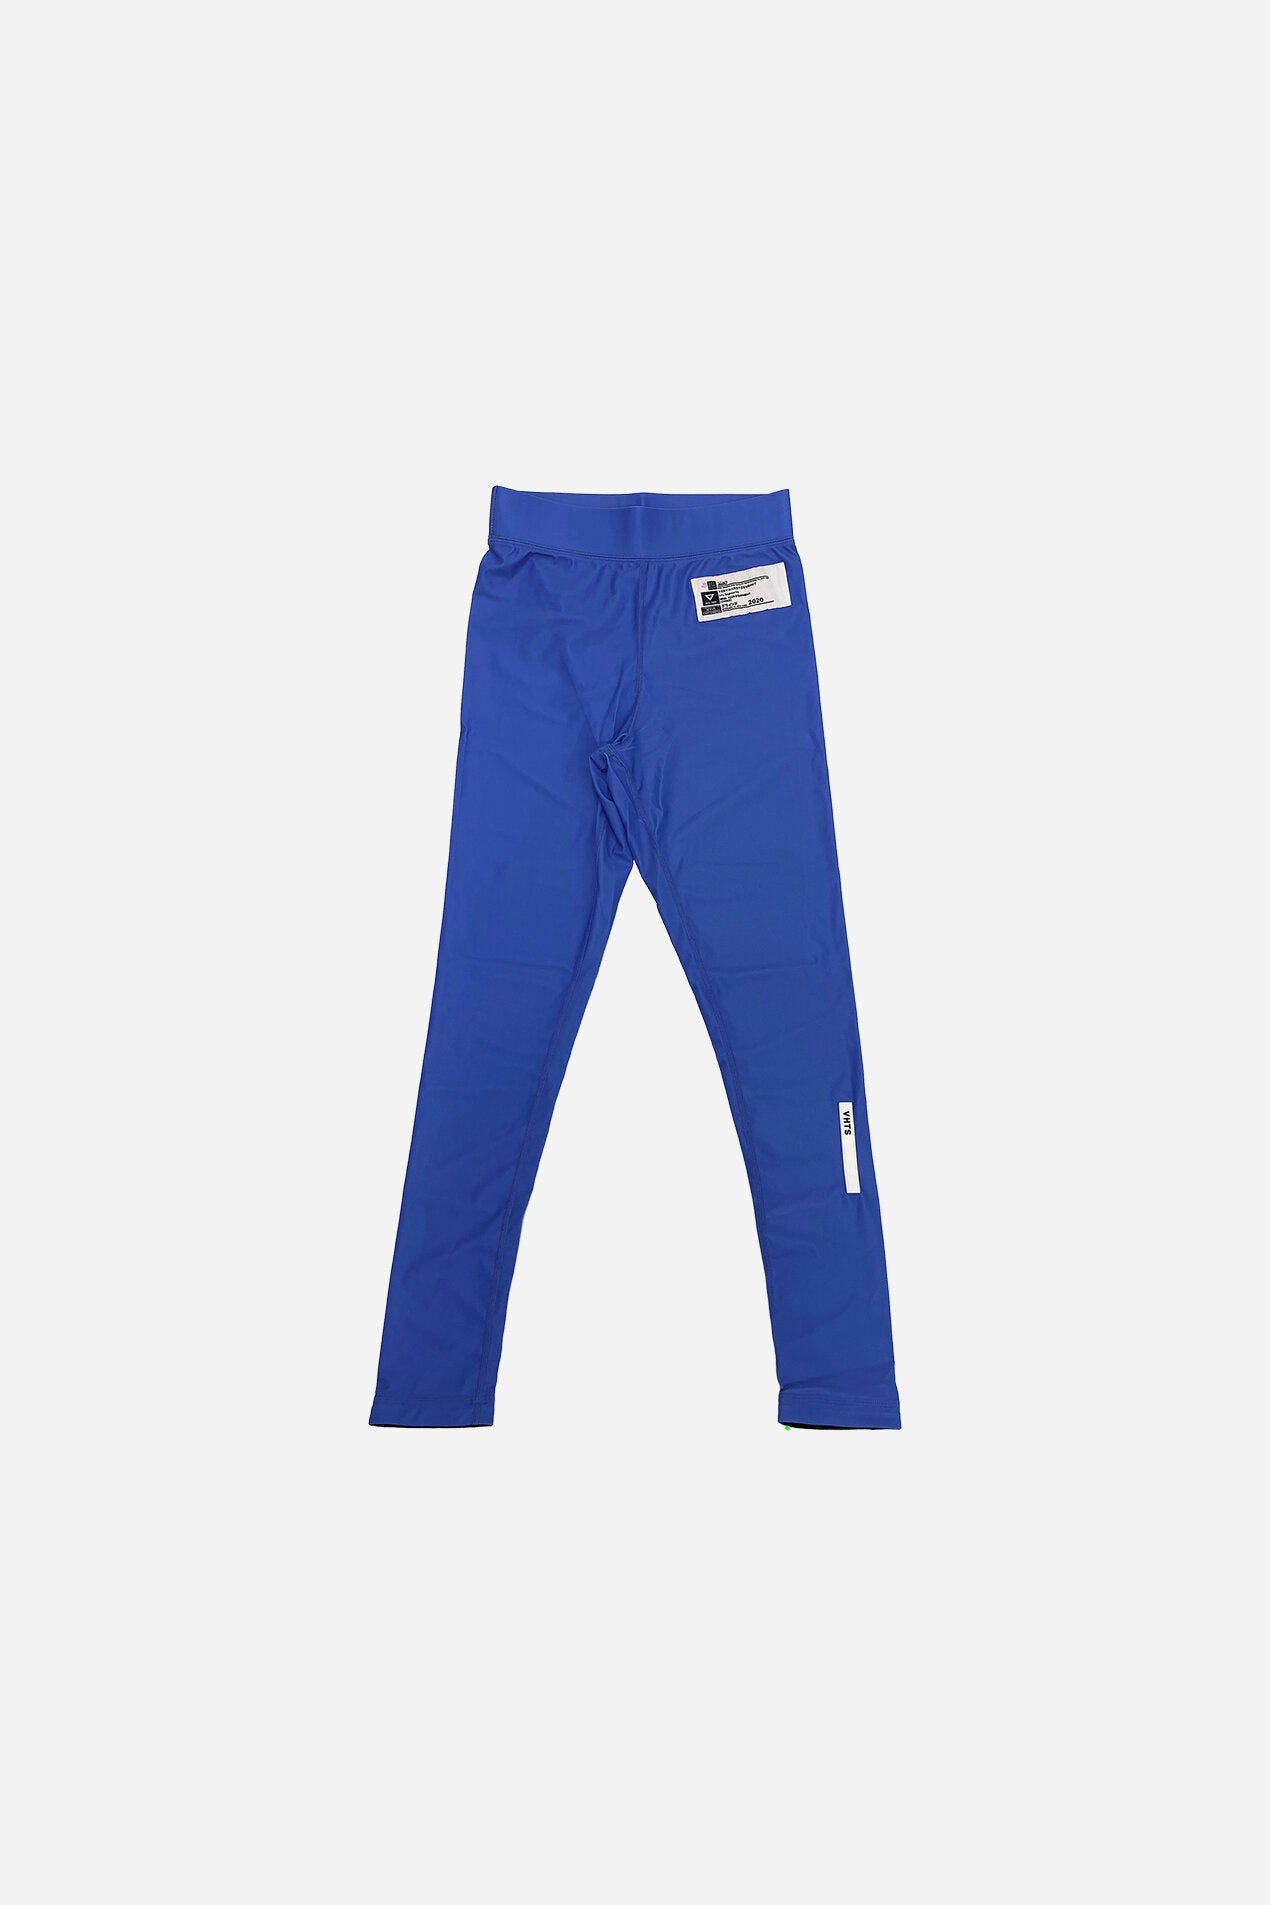 2020 Spats Blue 220 GSM Polyester 80% x lycra 20%  grip rubber band inside of end sleeve  vhts europe